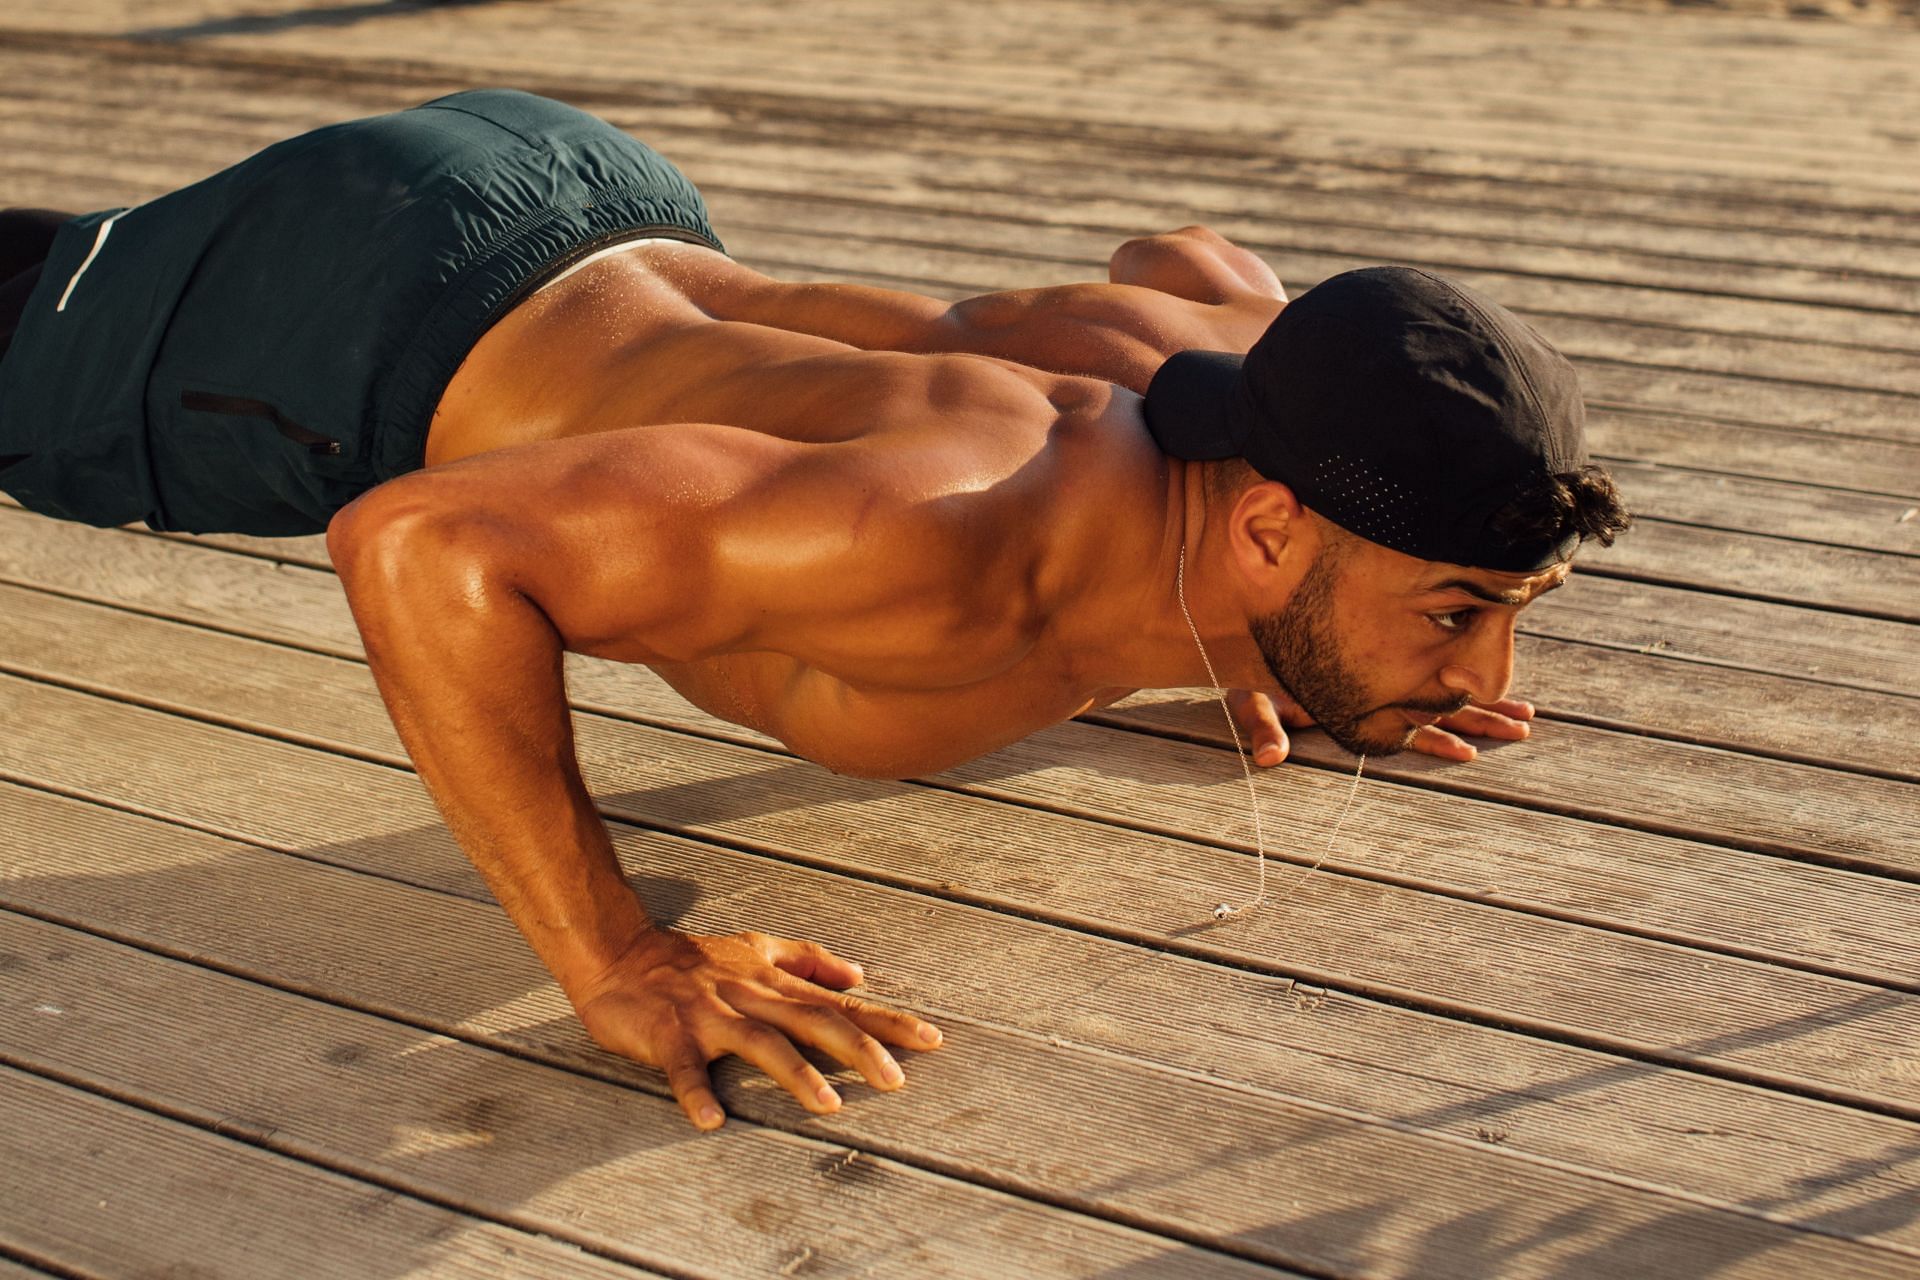 Exercises for men to get a stronger heart (Image via Pexels/Kool Shooters)